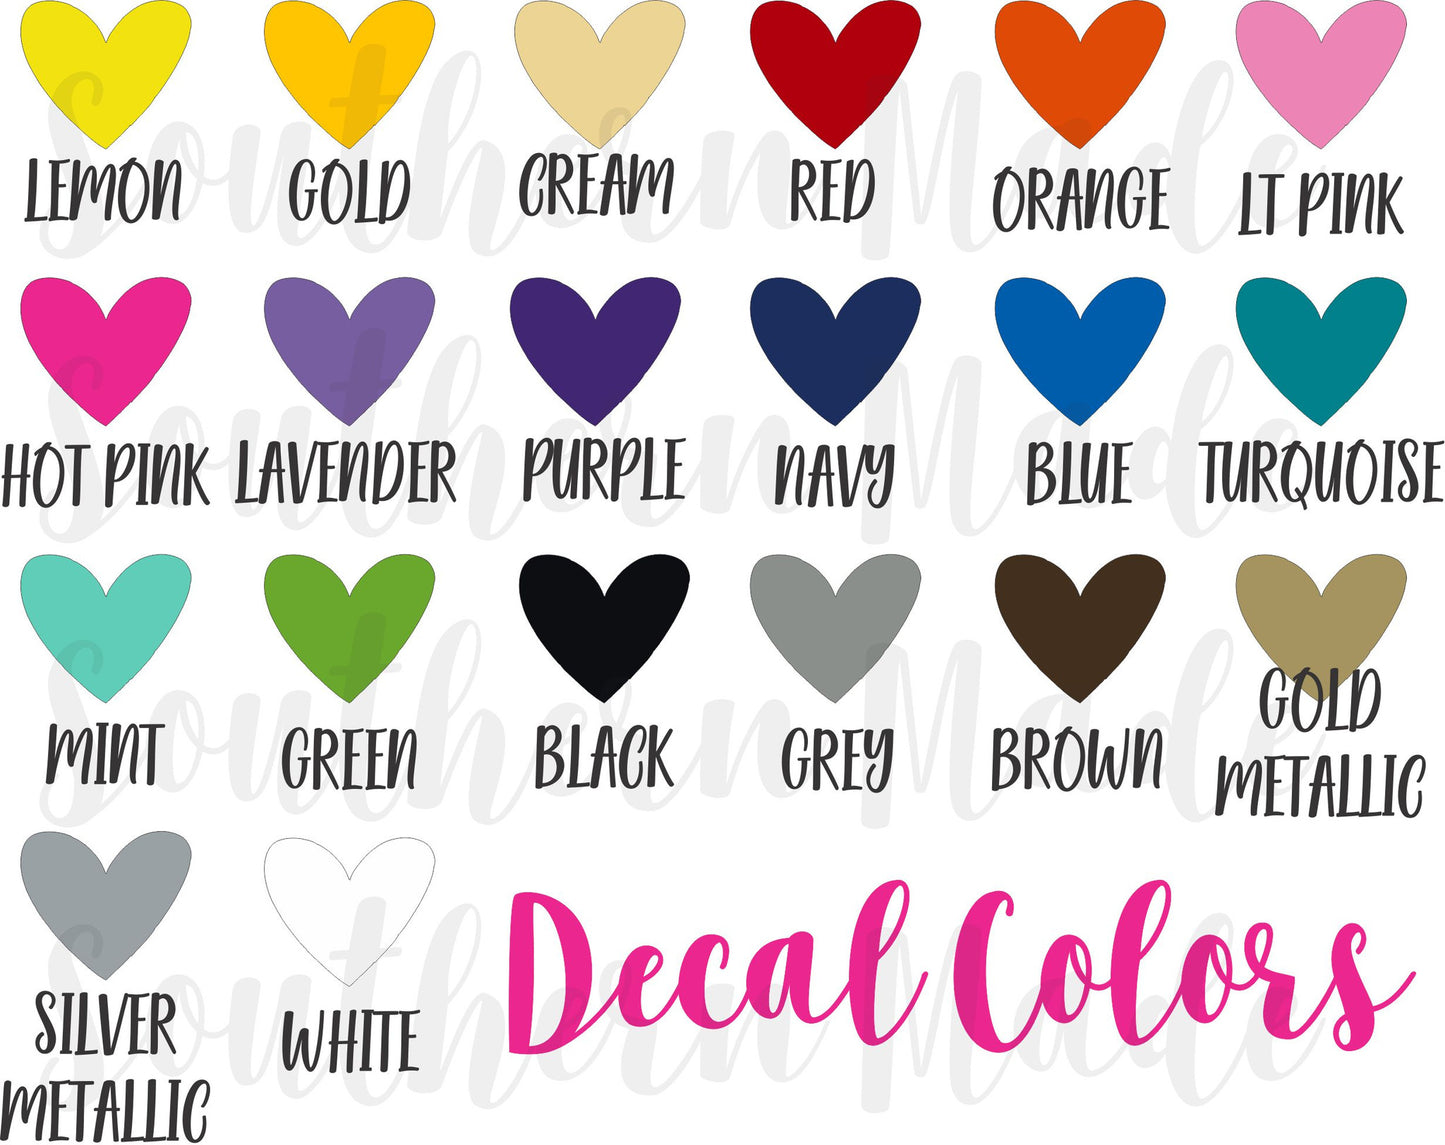 12" Decal Sheet // Choose your color